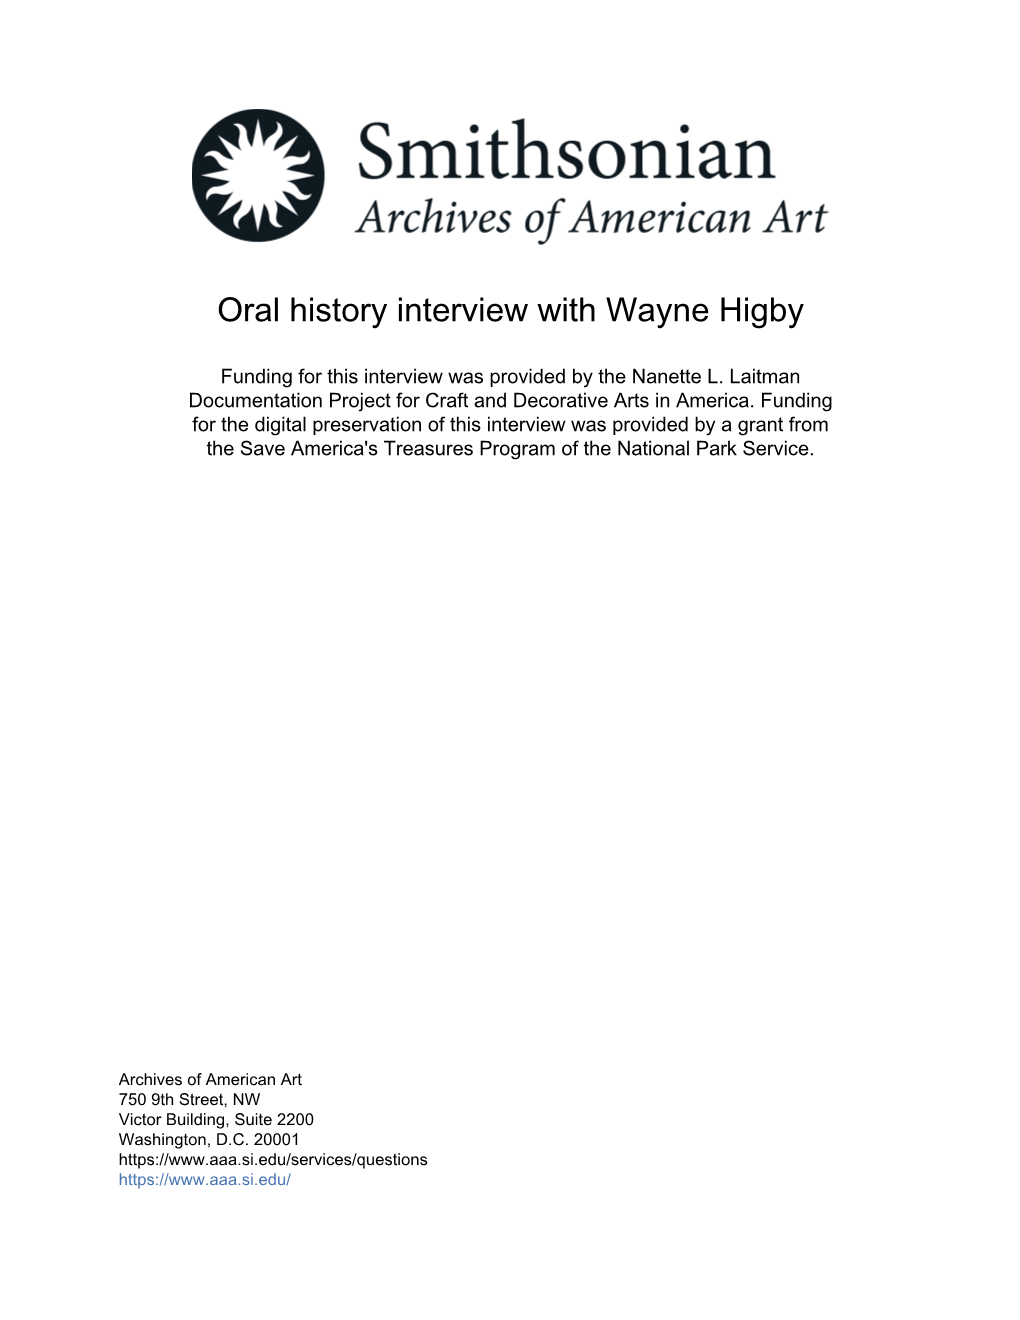 Oral History Interview with Wayne Higby